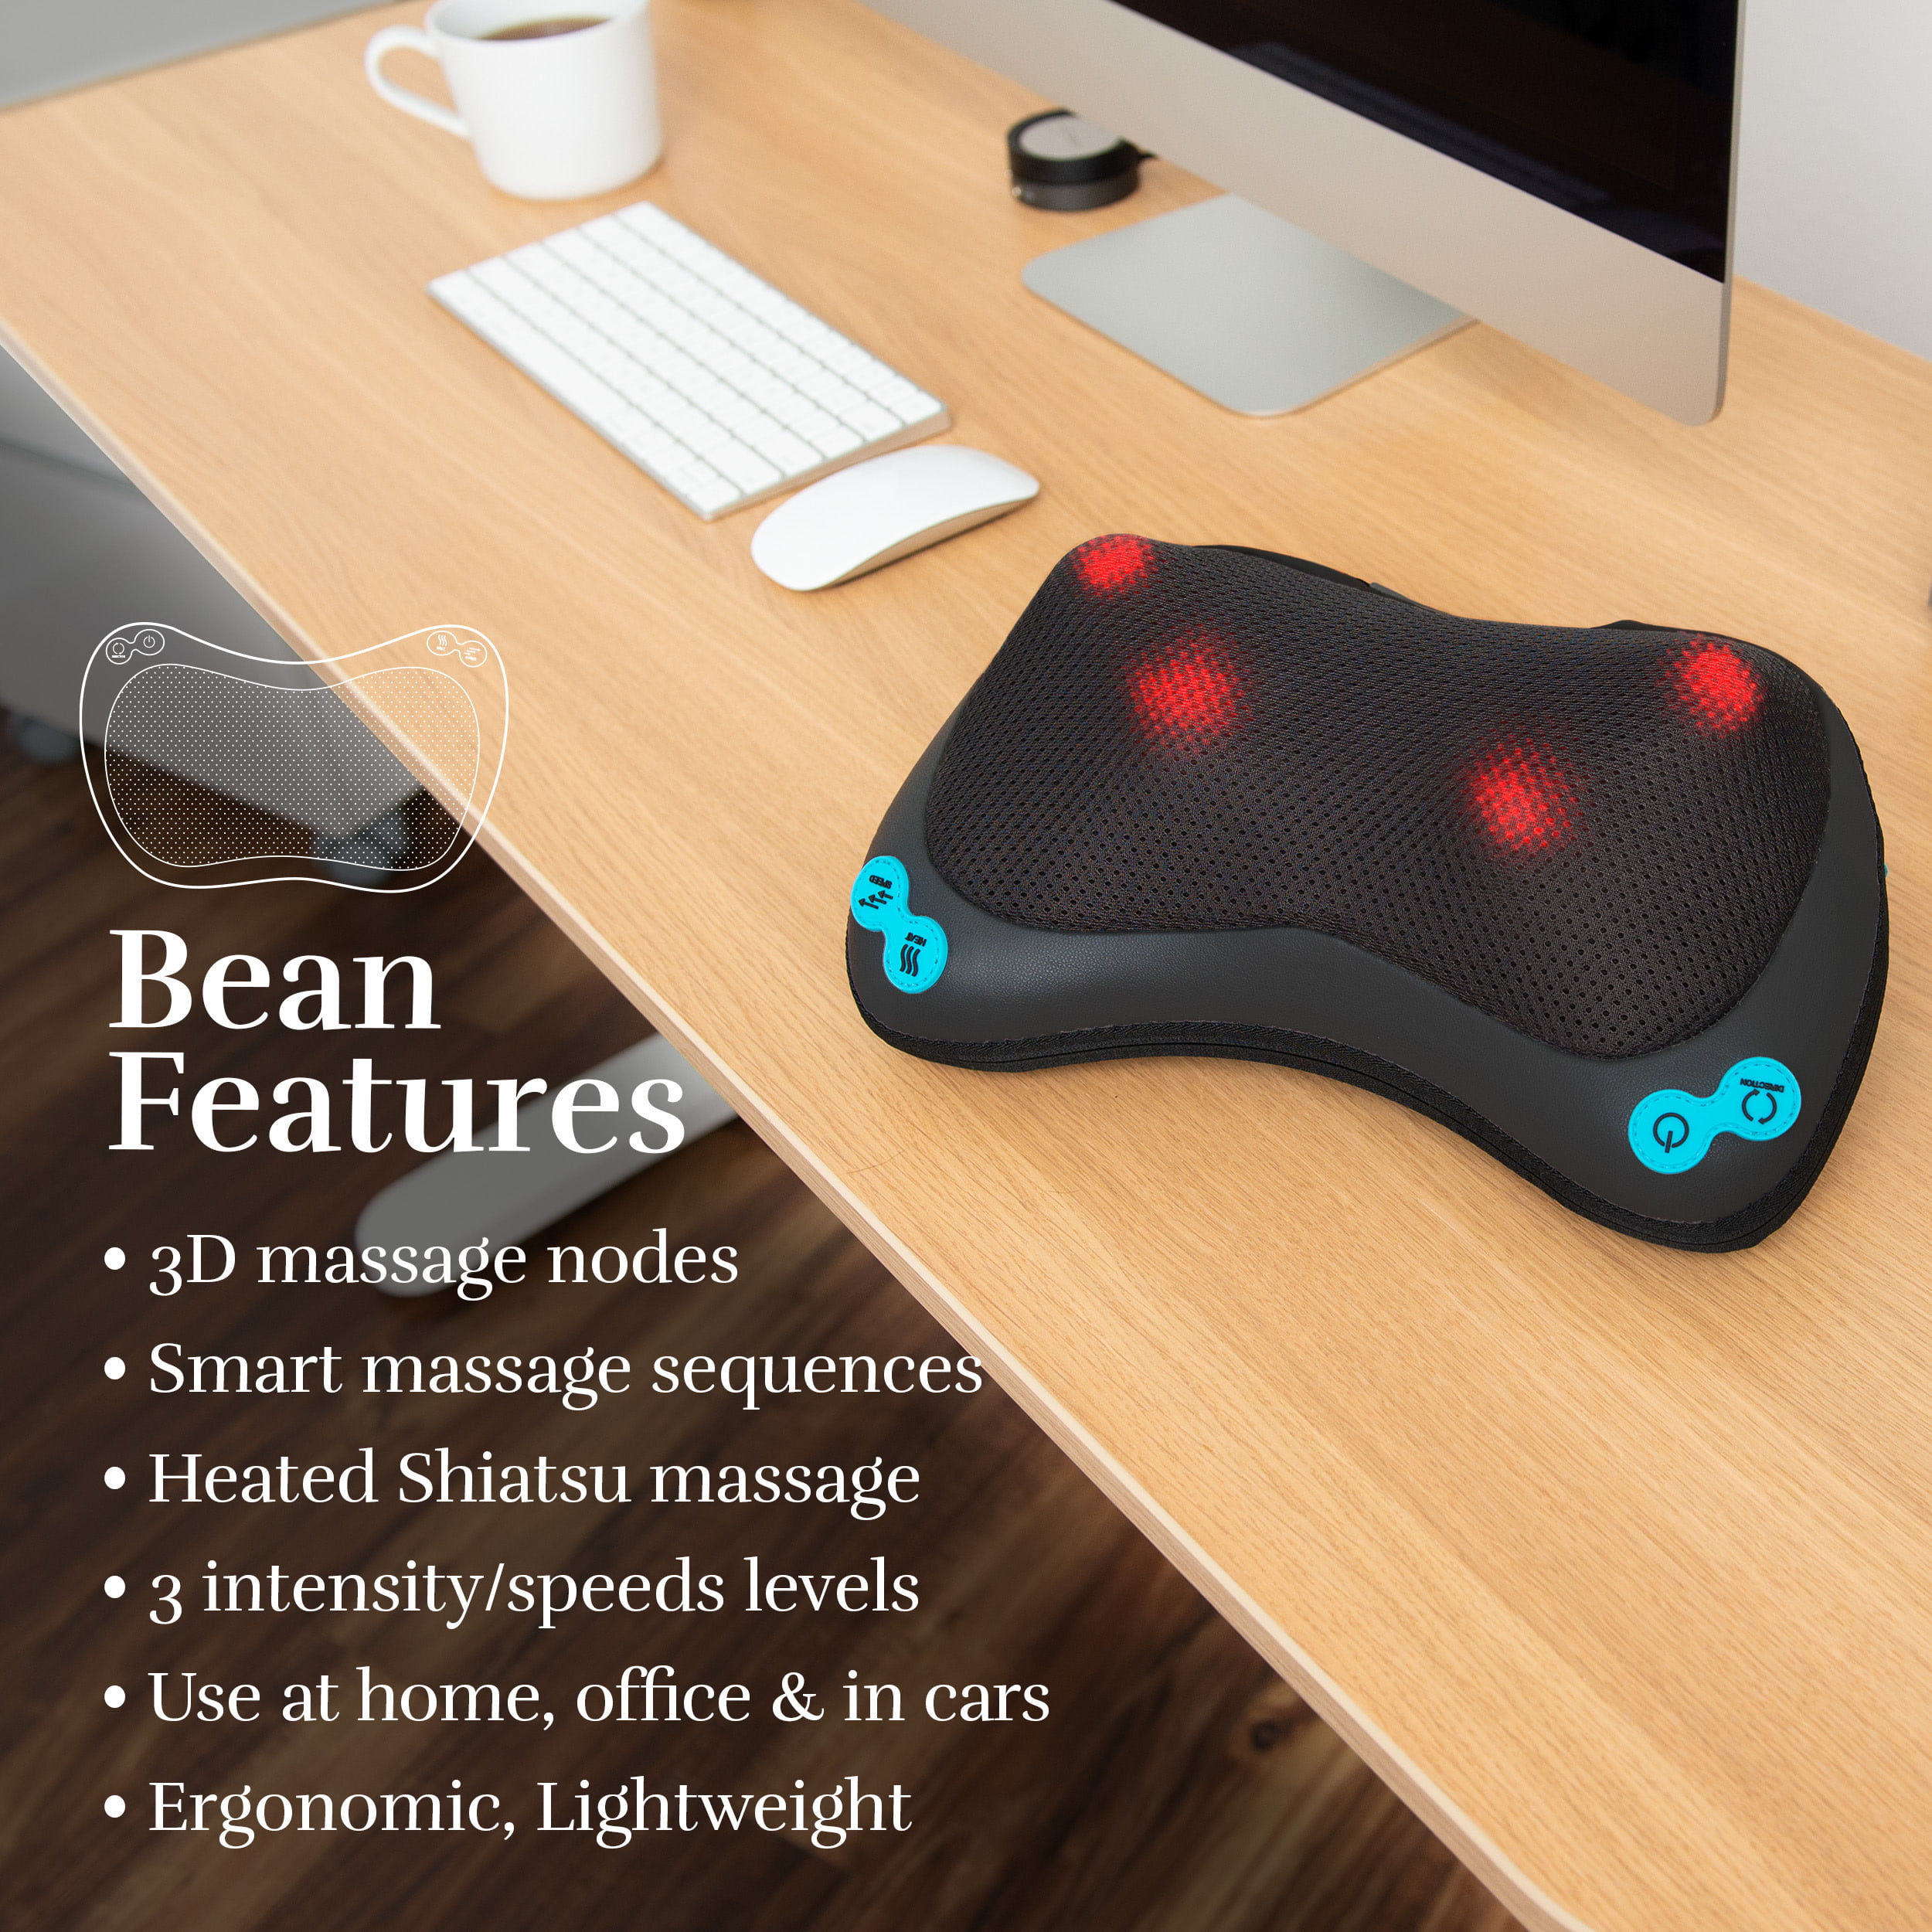 Shiatsu Massage Pillow by Njoie. Heated Shiatsu Massage with 3D Rotation Kneading Nodes, Removable Dust Cover, & Car Adapter. Full-Body Deep Tissue